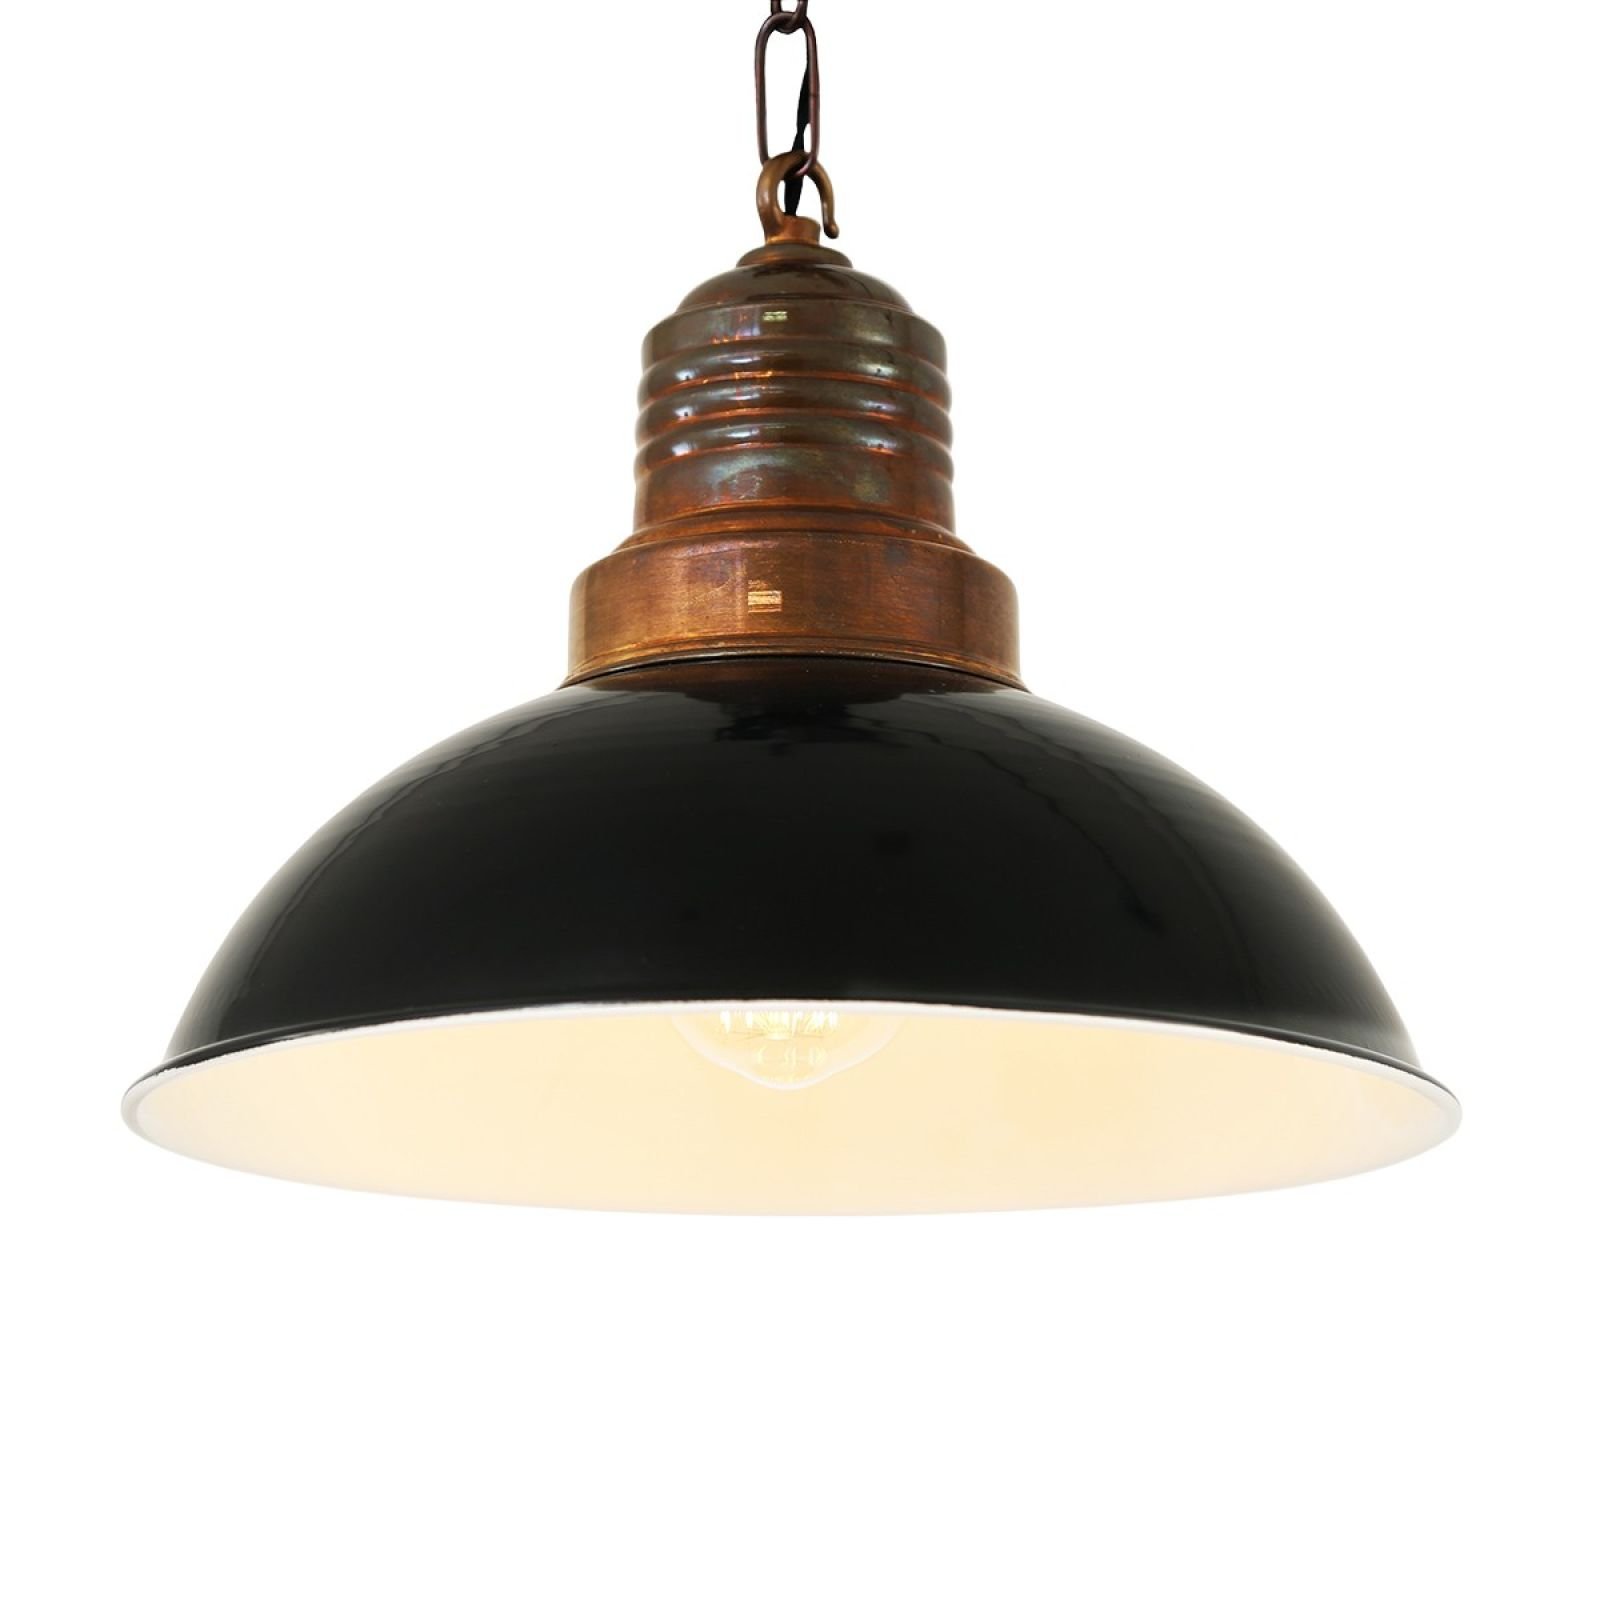 Ypres Vintage Style Ceiling Pendant